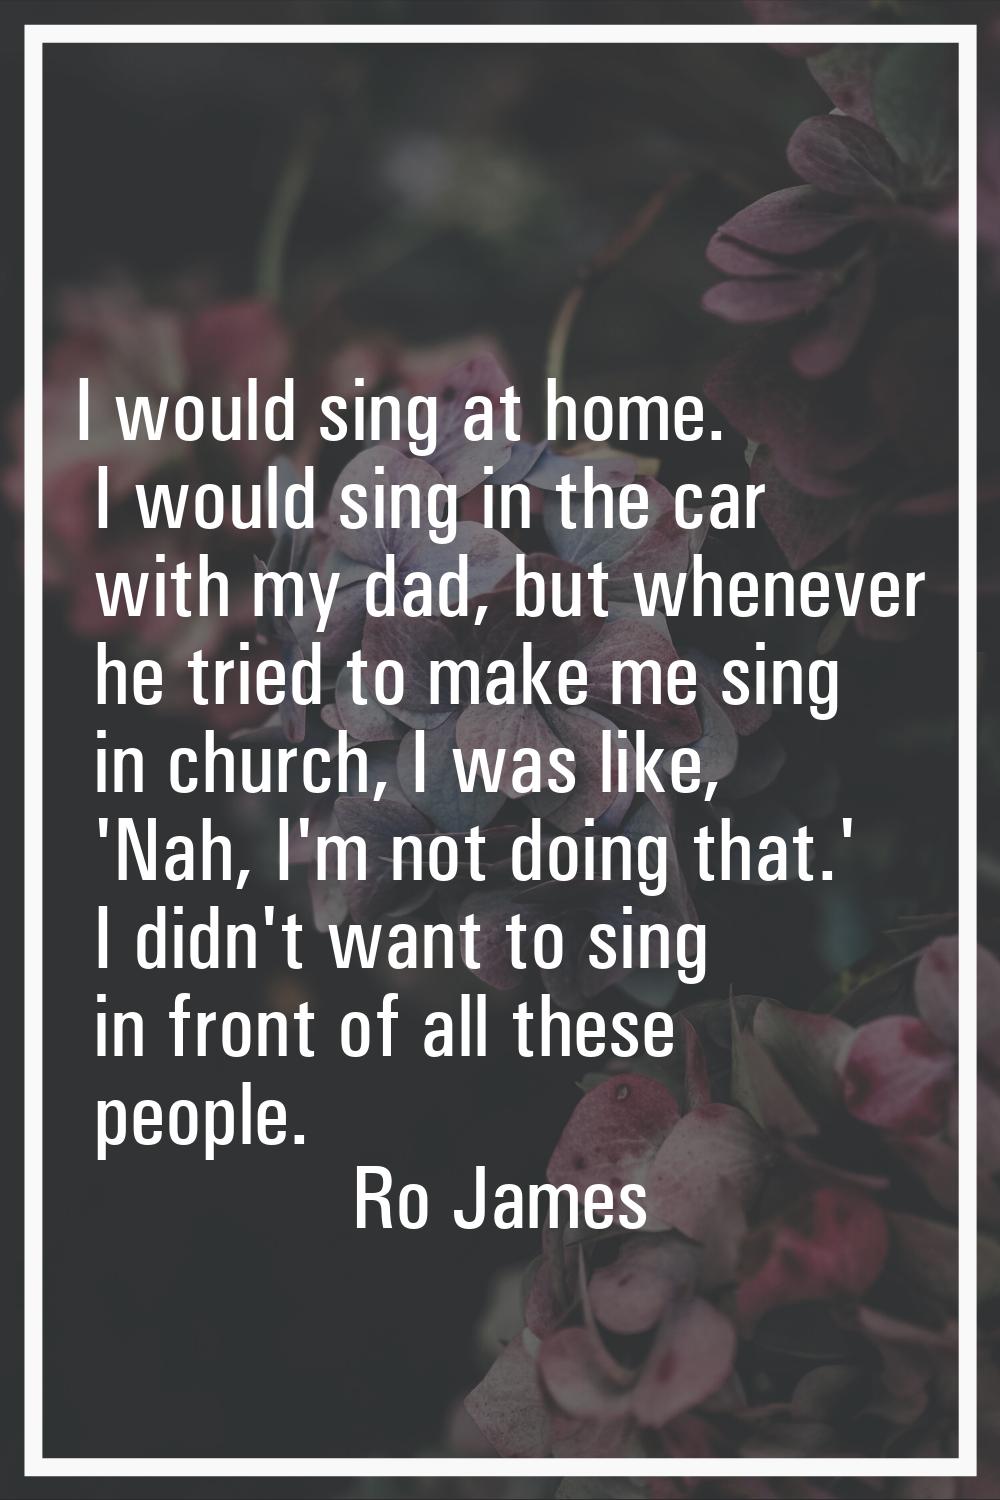 I would sing at home. I would sing in the car with my dad, but whenever he tried to make me sing in